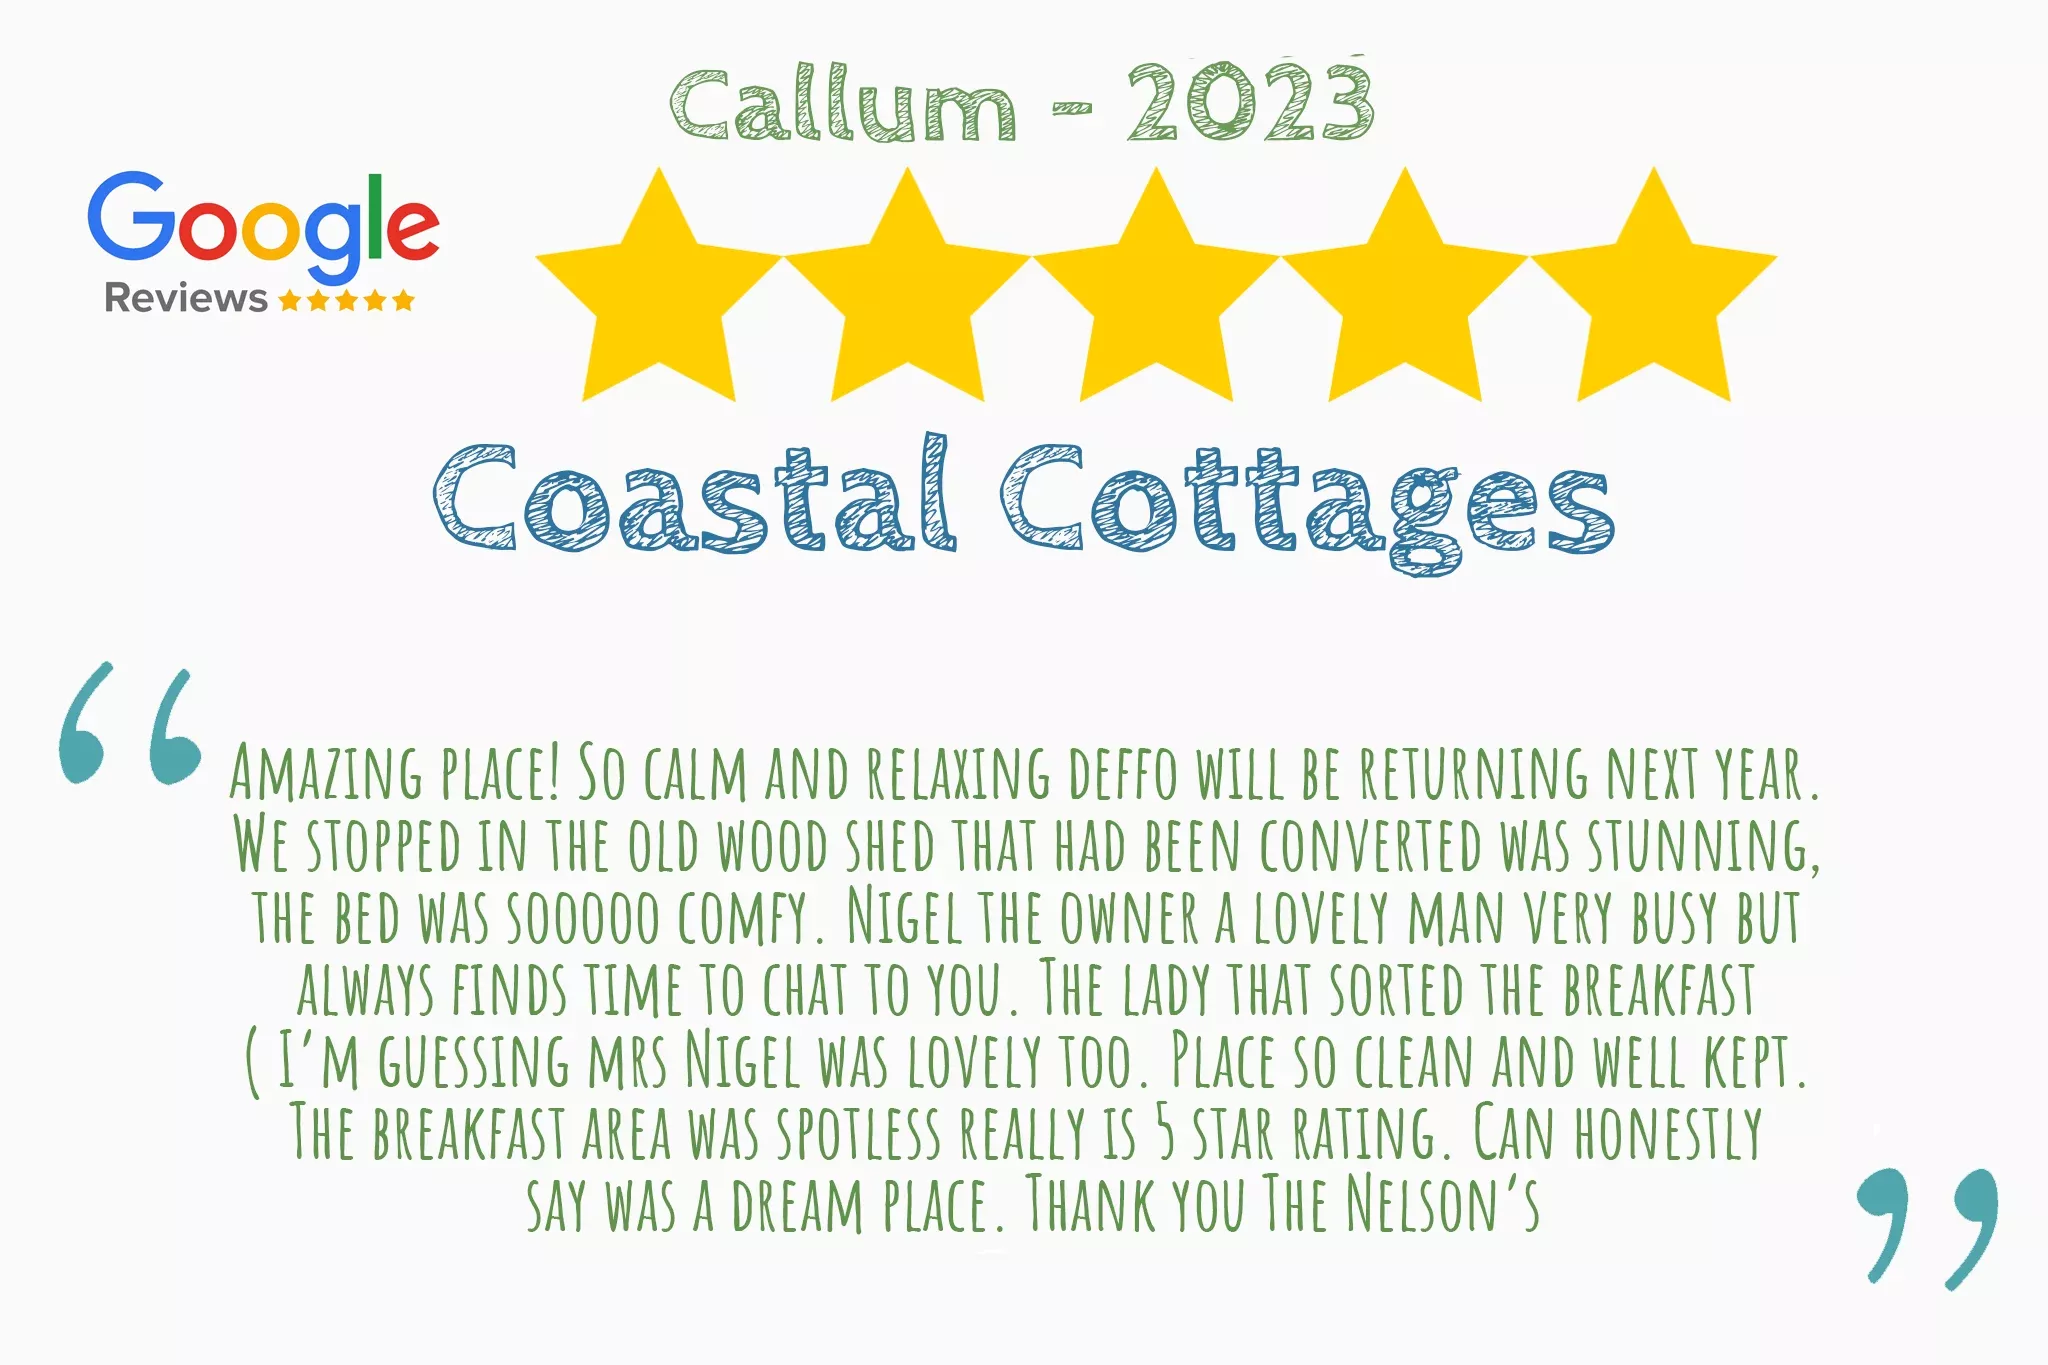 Five star review from Callum on Google Reviews that says "Amazing place! So calm and relaxing deffo will be returning next year.  We stopped in the old wood shed that had been converted was stunning,  the bed was sooooo comfy. Nigel the owner a lovely man very busy but  always finds time to chat to you. The lady that sorted the breakfast  ( I’m guessing mrs Nigel was lovely too. Place so clean and well kept.  The breakfast area was spotless really is 5 star rating. Can honestly  say was a dream place. Thank you The Nelson’s"